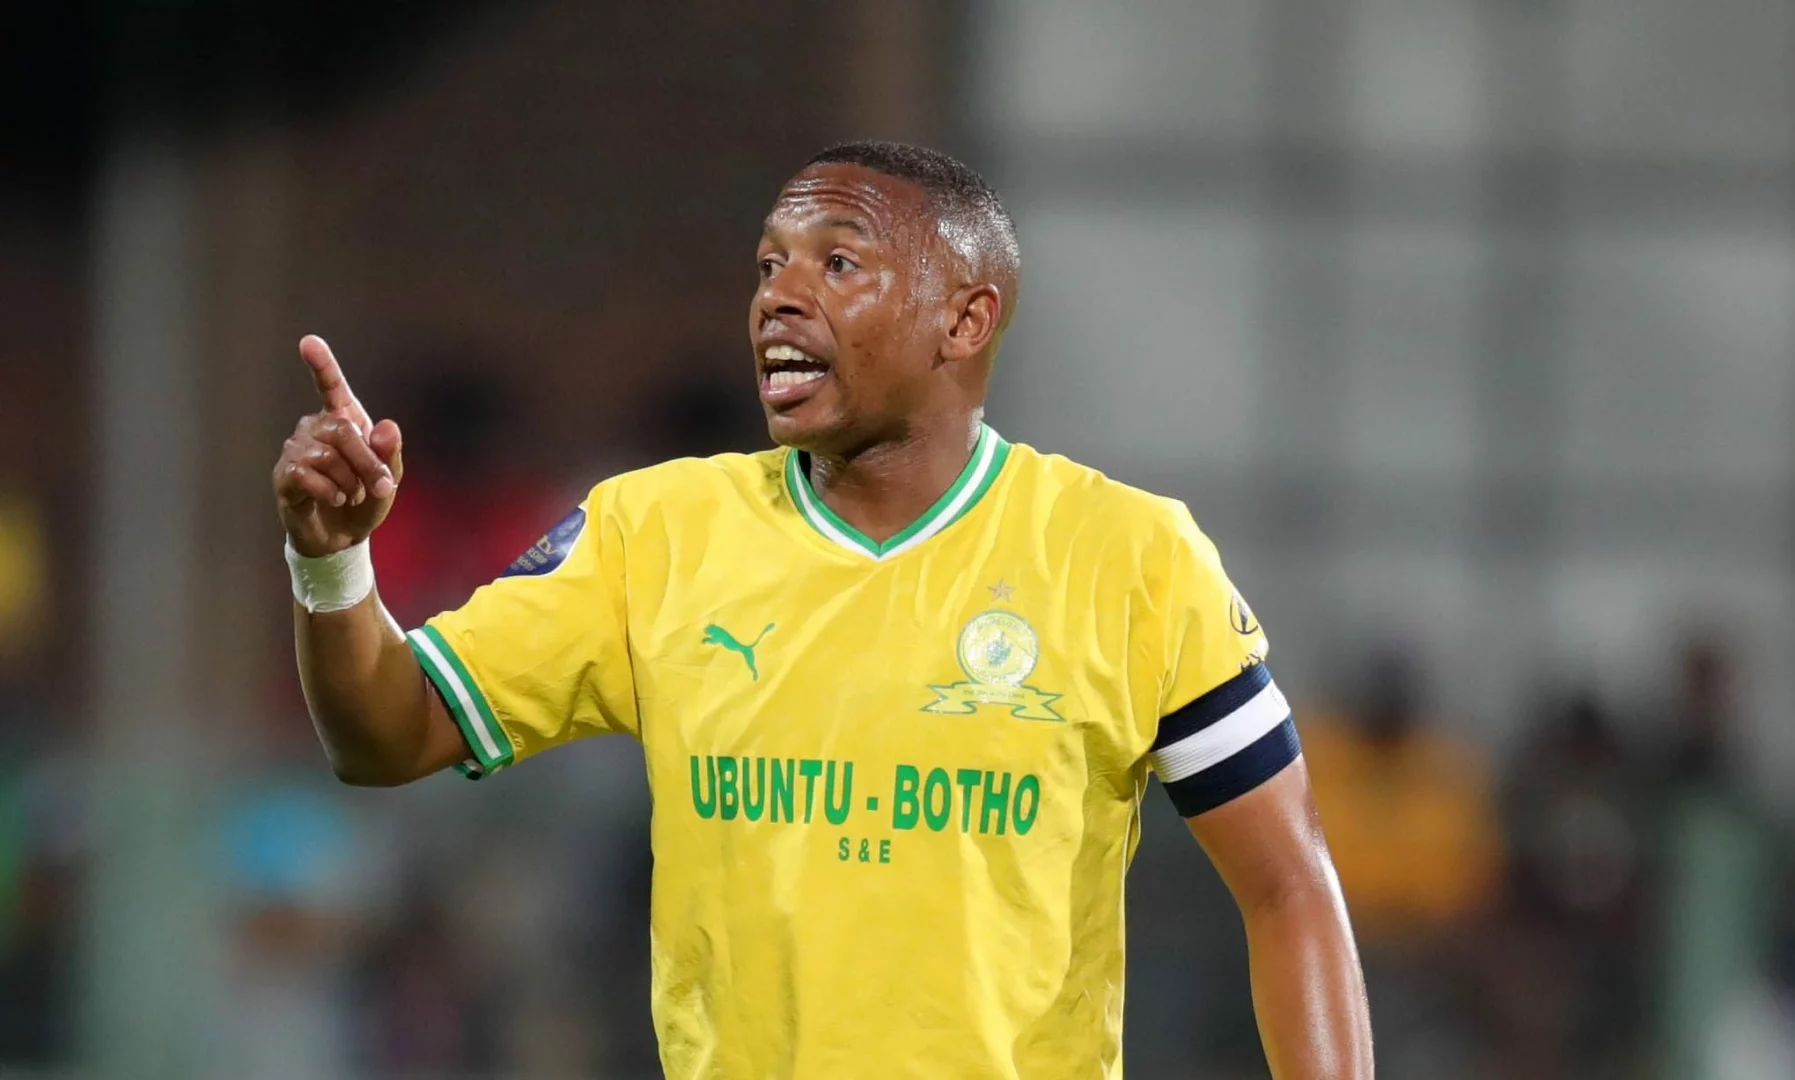 Andile Jali is set to be a free agent after reports that he will be released by Mamelodi Sundowns at the conclusion of his deal at the end of the season.